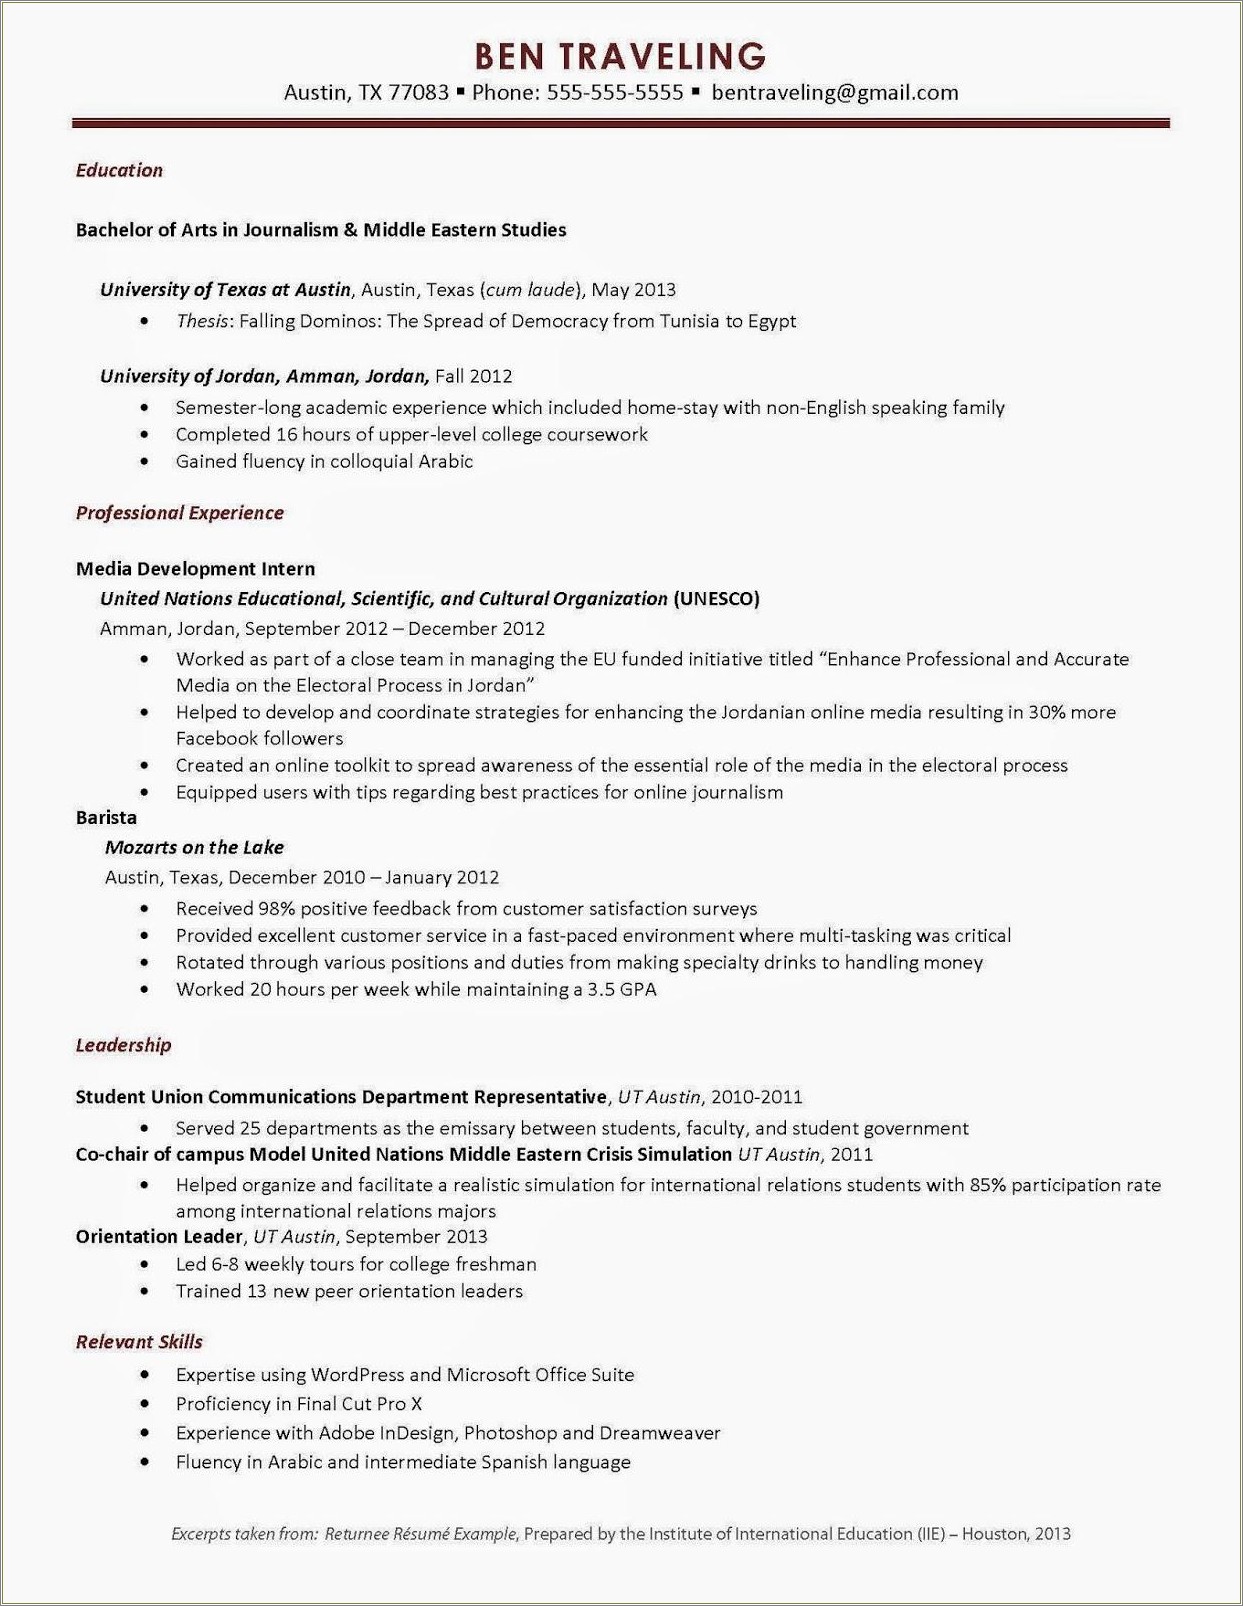 Sample Resume For Study Abroad Application